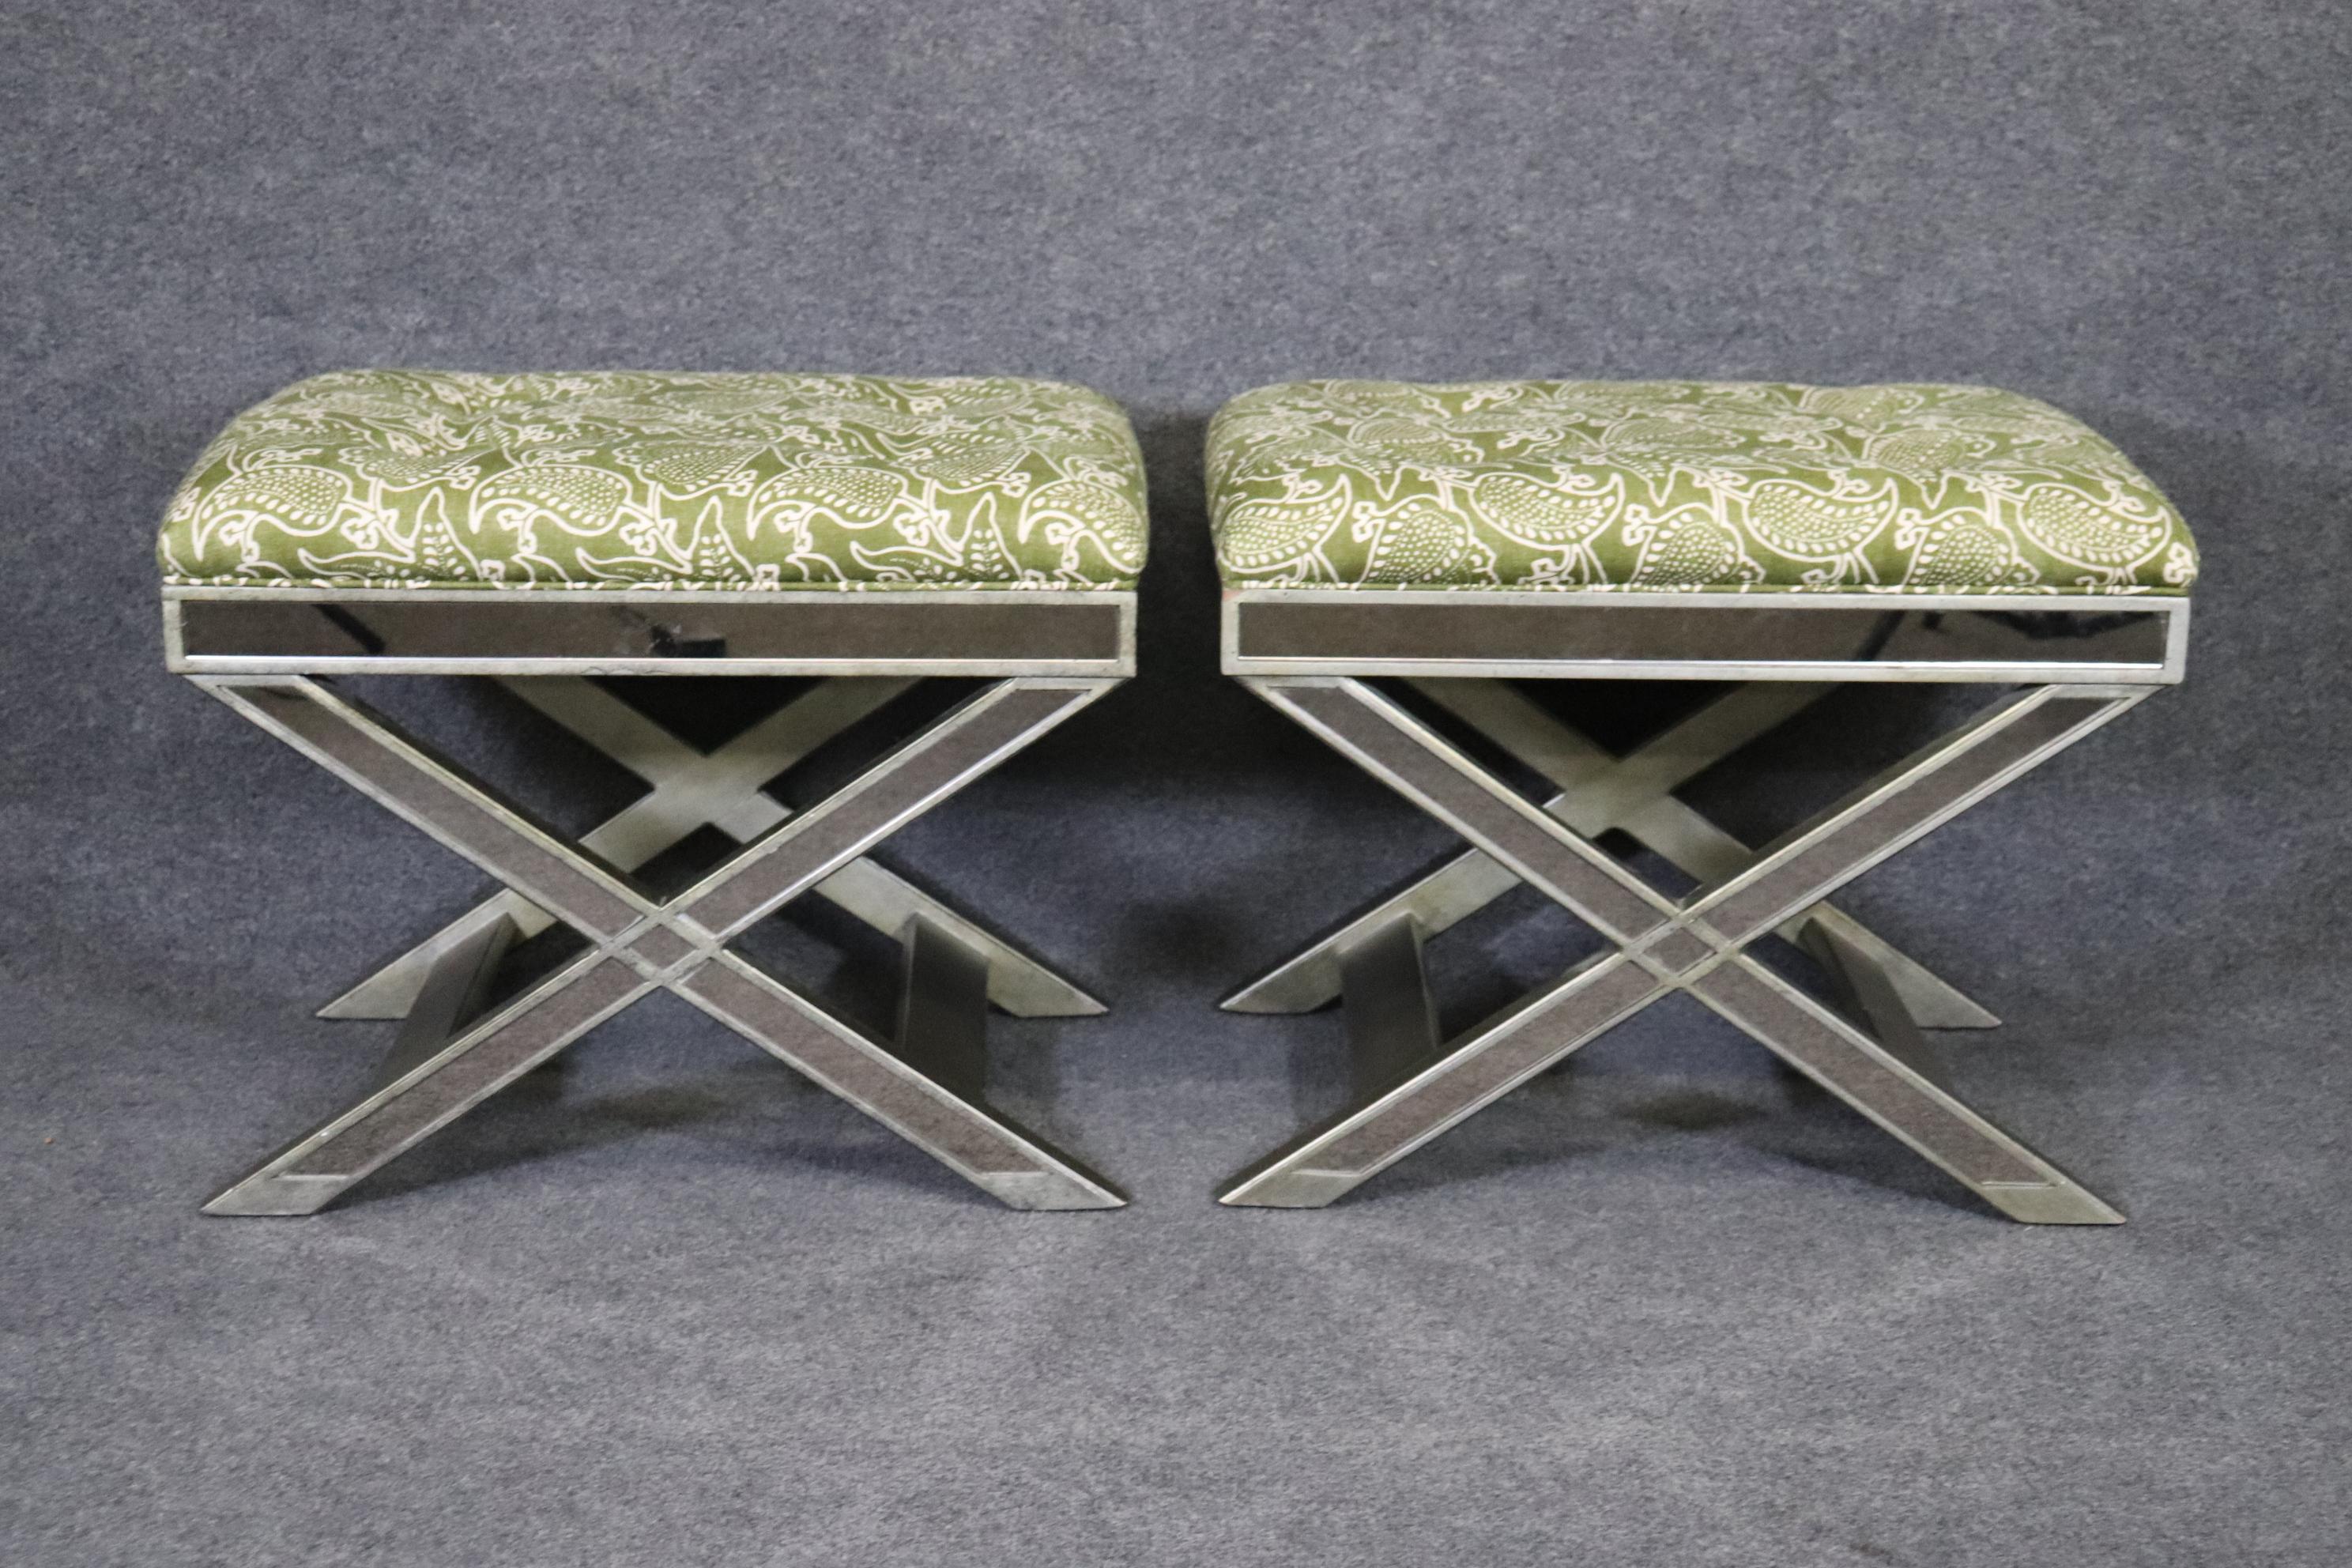 This is an exceptional pair of Regency style Mirrored X Benches! They are super high quality and are made from high quality materials. They mirrored Panels add a unique touch that not many other benches will have. They have green and white